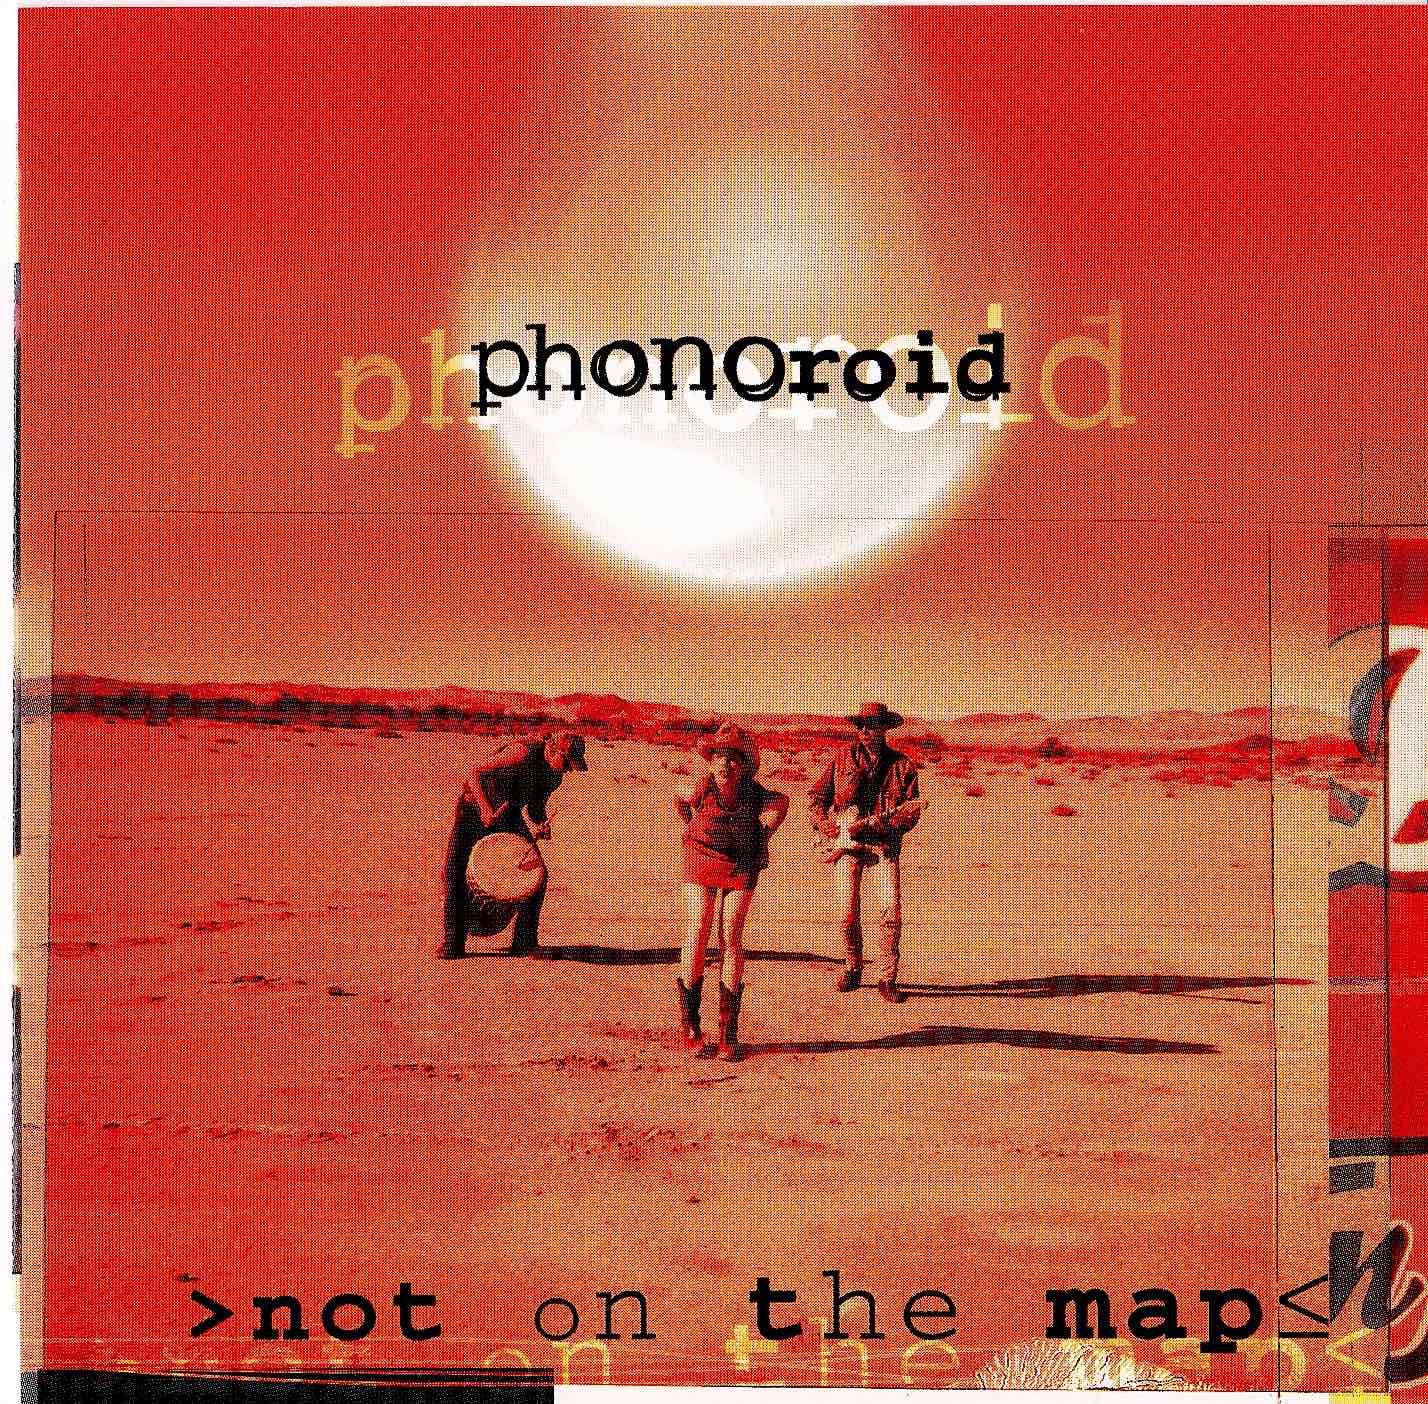 cover of “phonoroid“ album “not on the map“